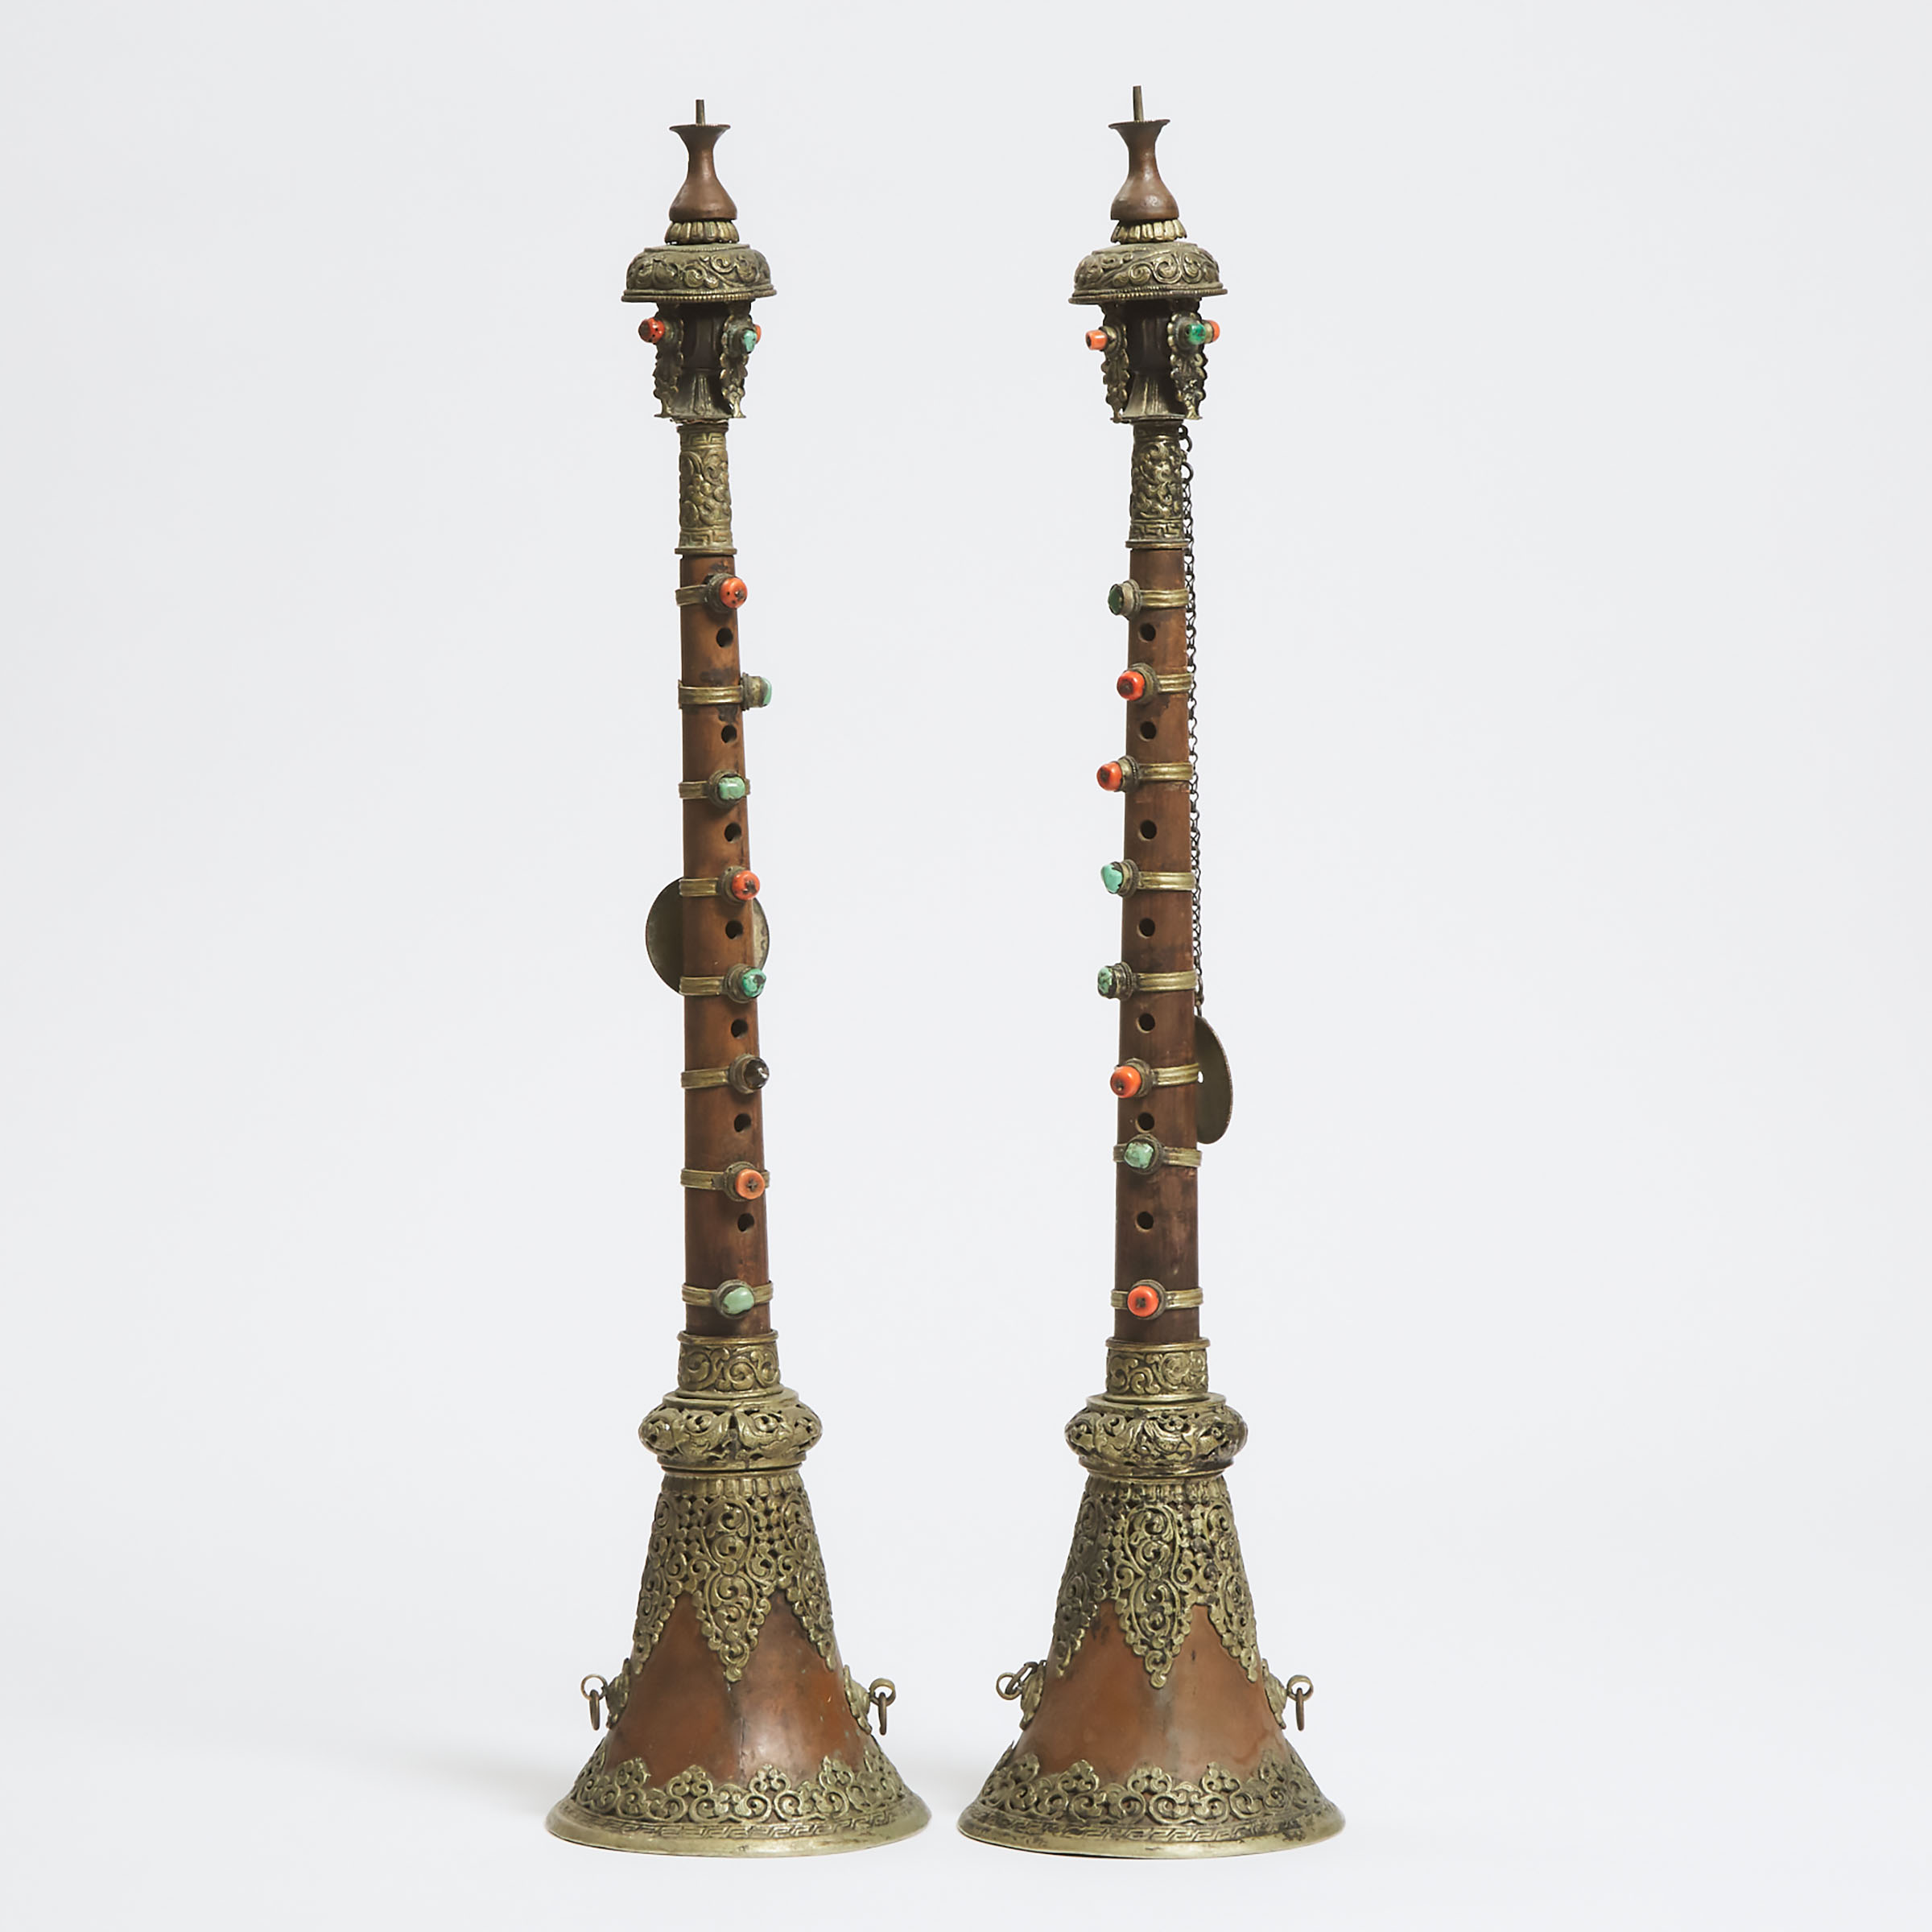 A Pair of Tibetan Wood and Metal Trumpet Horns Inlaid with Turquoise and Coral, 19th Century